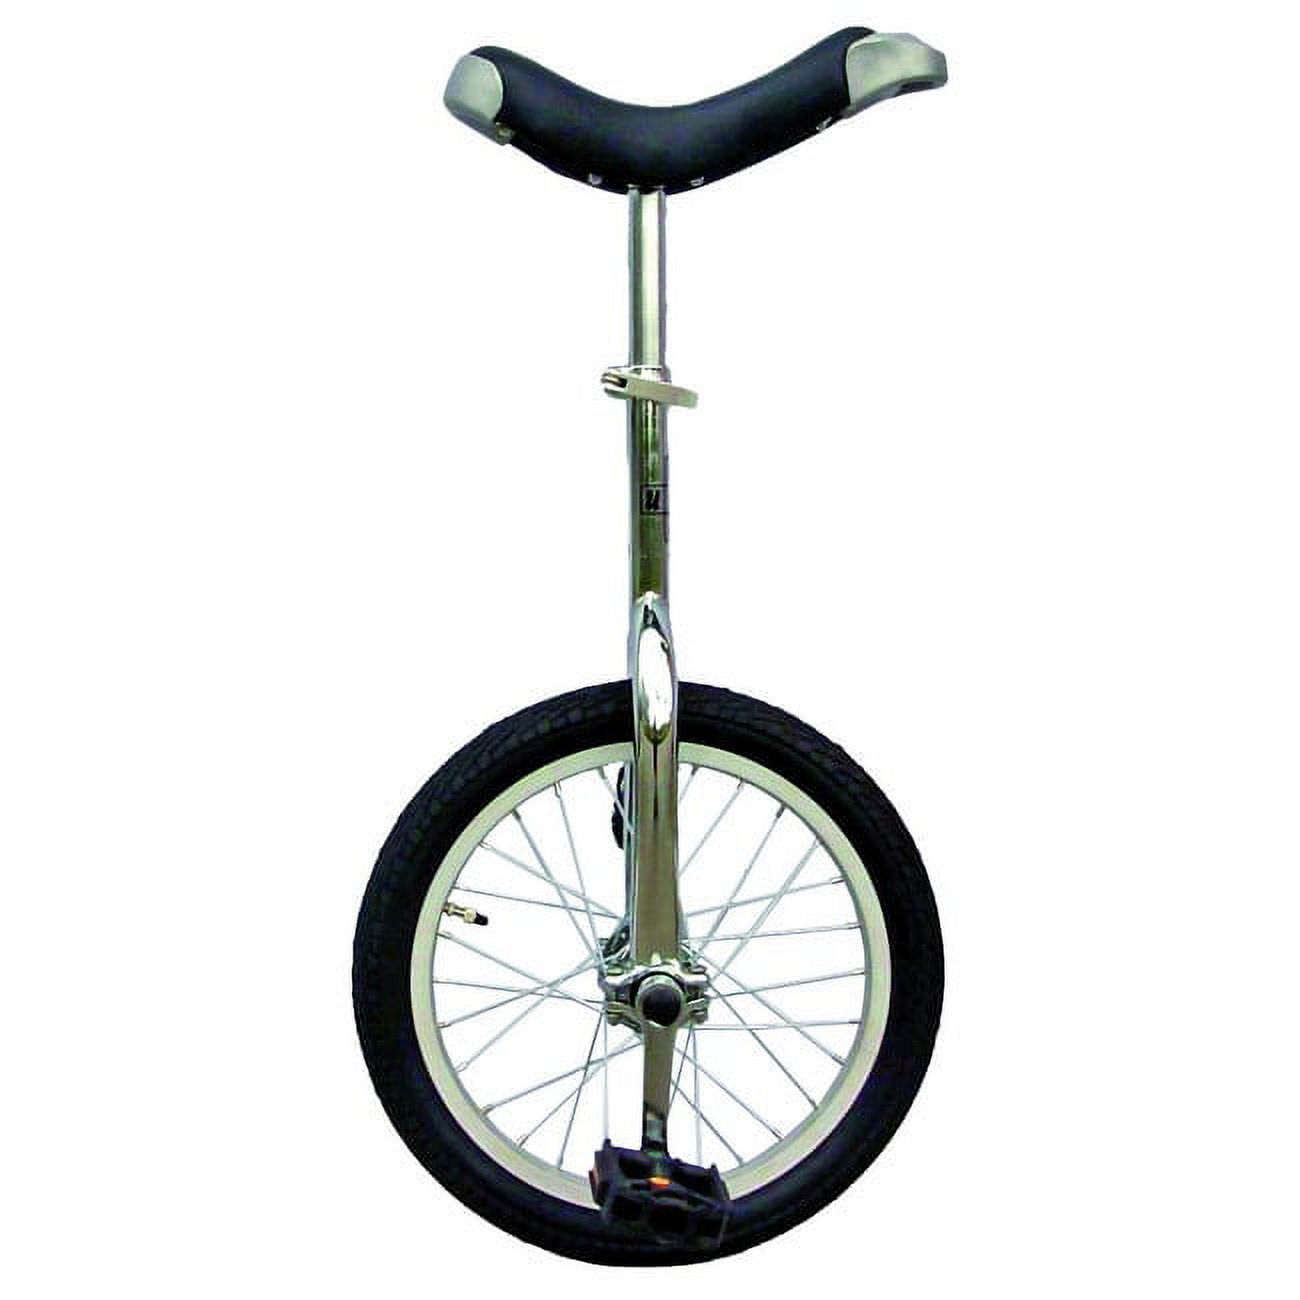 Fun 16 Inch Wheel Chrome Unicycle with Alloy Rim - image 2 of 3